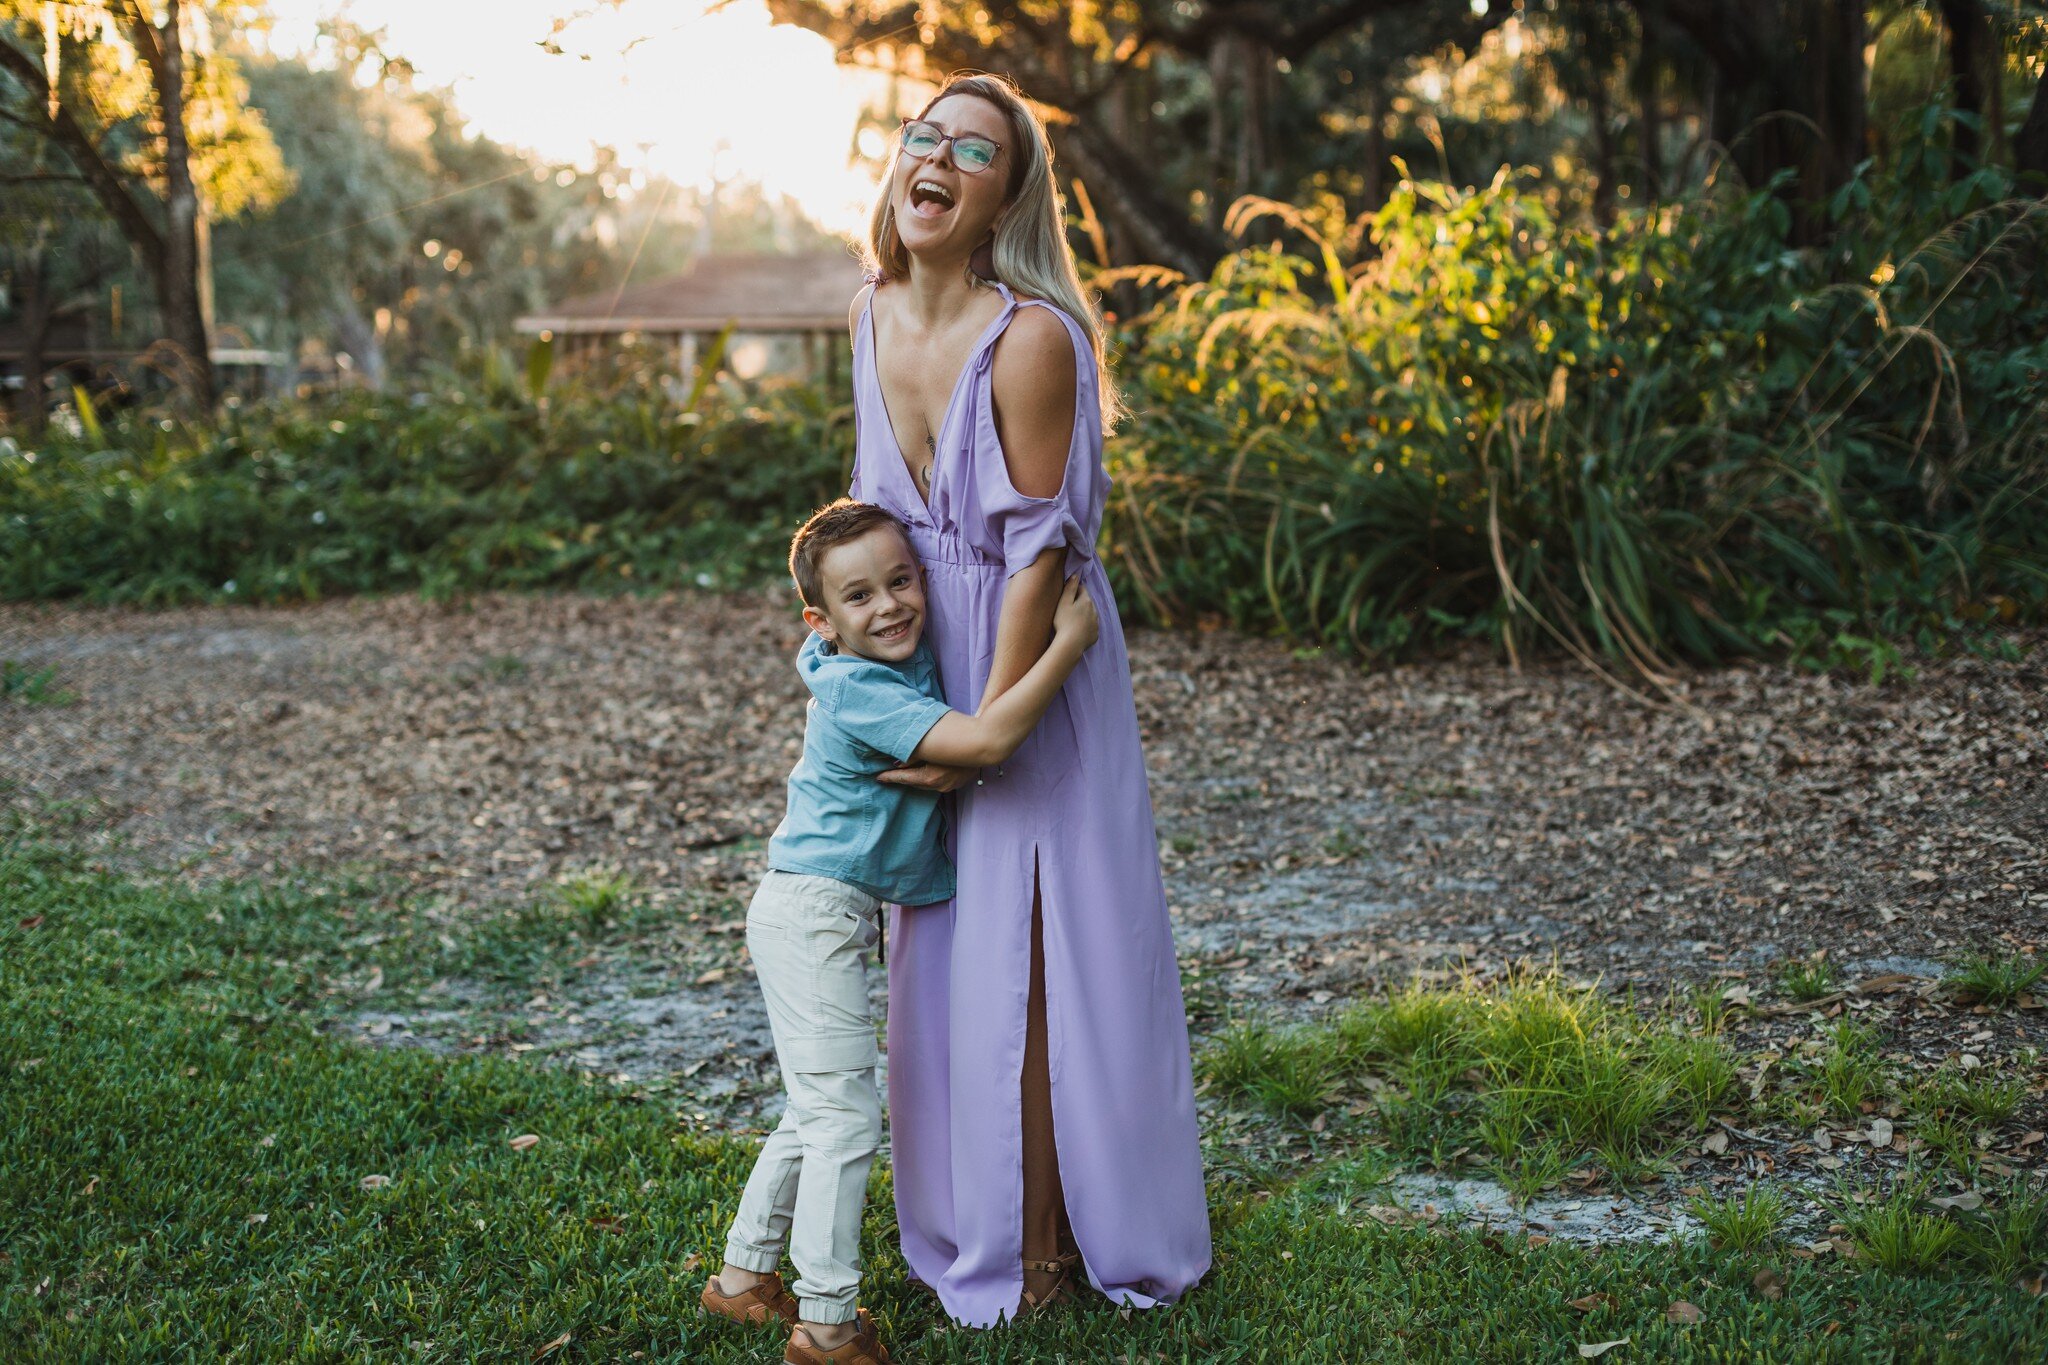 Mom + Me Minis are live, April 14 or April 20 at Dickson Azalea park. Why there? Because it's beautiful! In under 100 feet we have greenery, bridges, and sunsets. 

A mini session is great for busy moms and kids with short attention spans, it's 15 mi